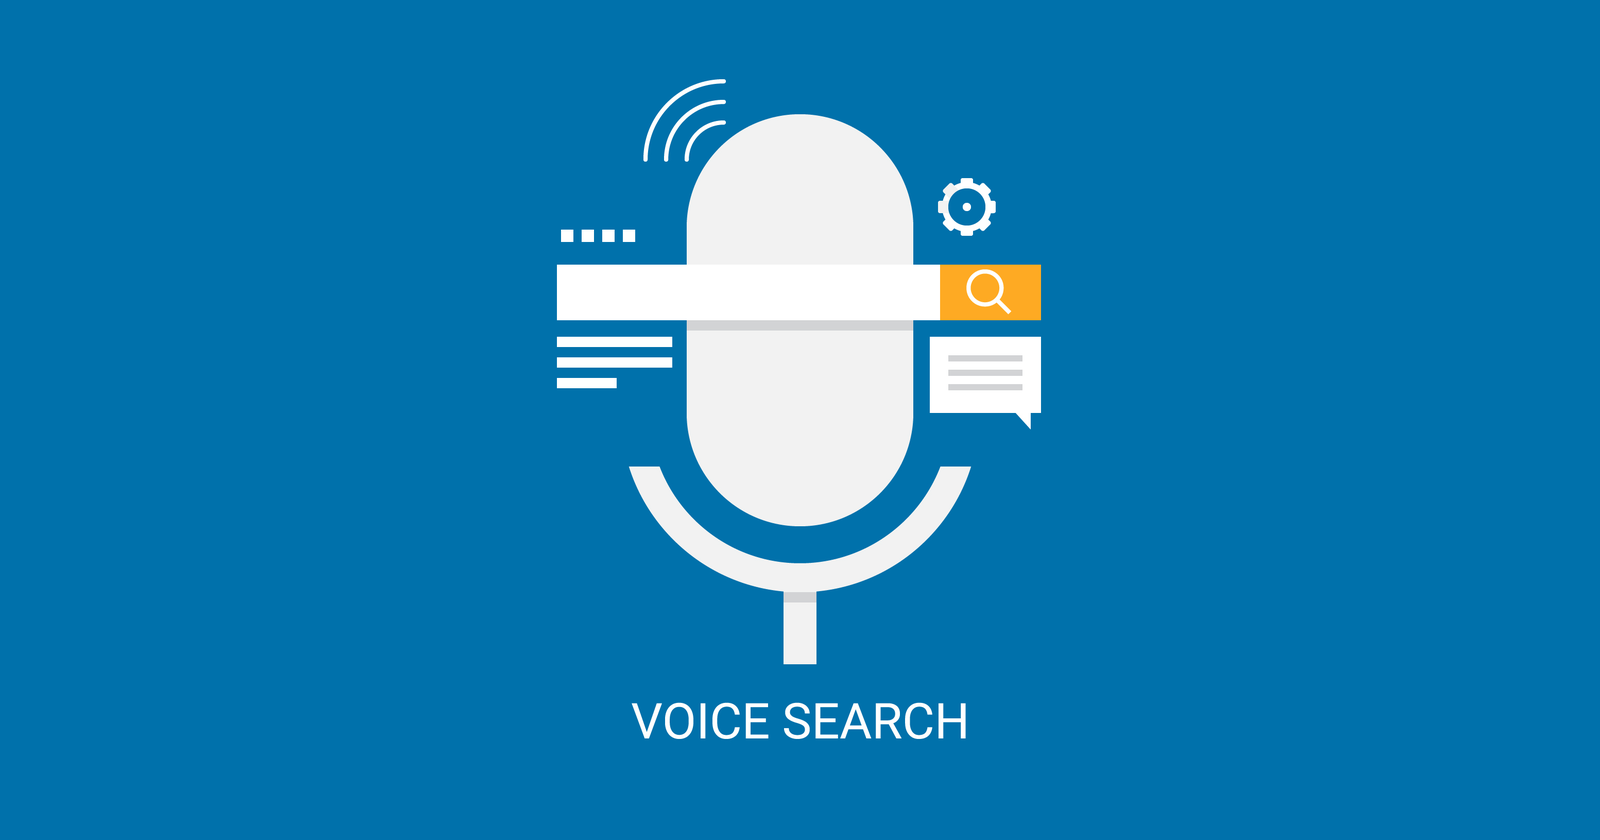 Voice search is becoming increasingly common due to the increase in demand for virtual assistants